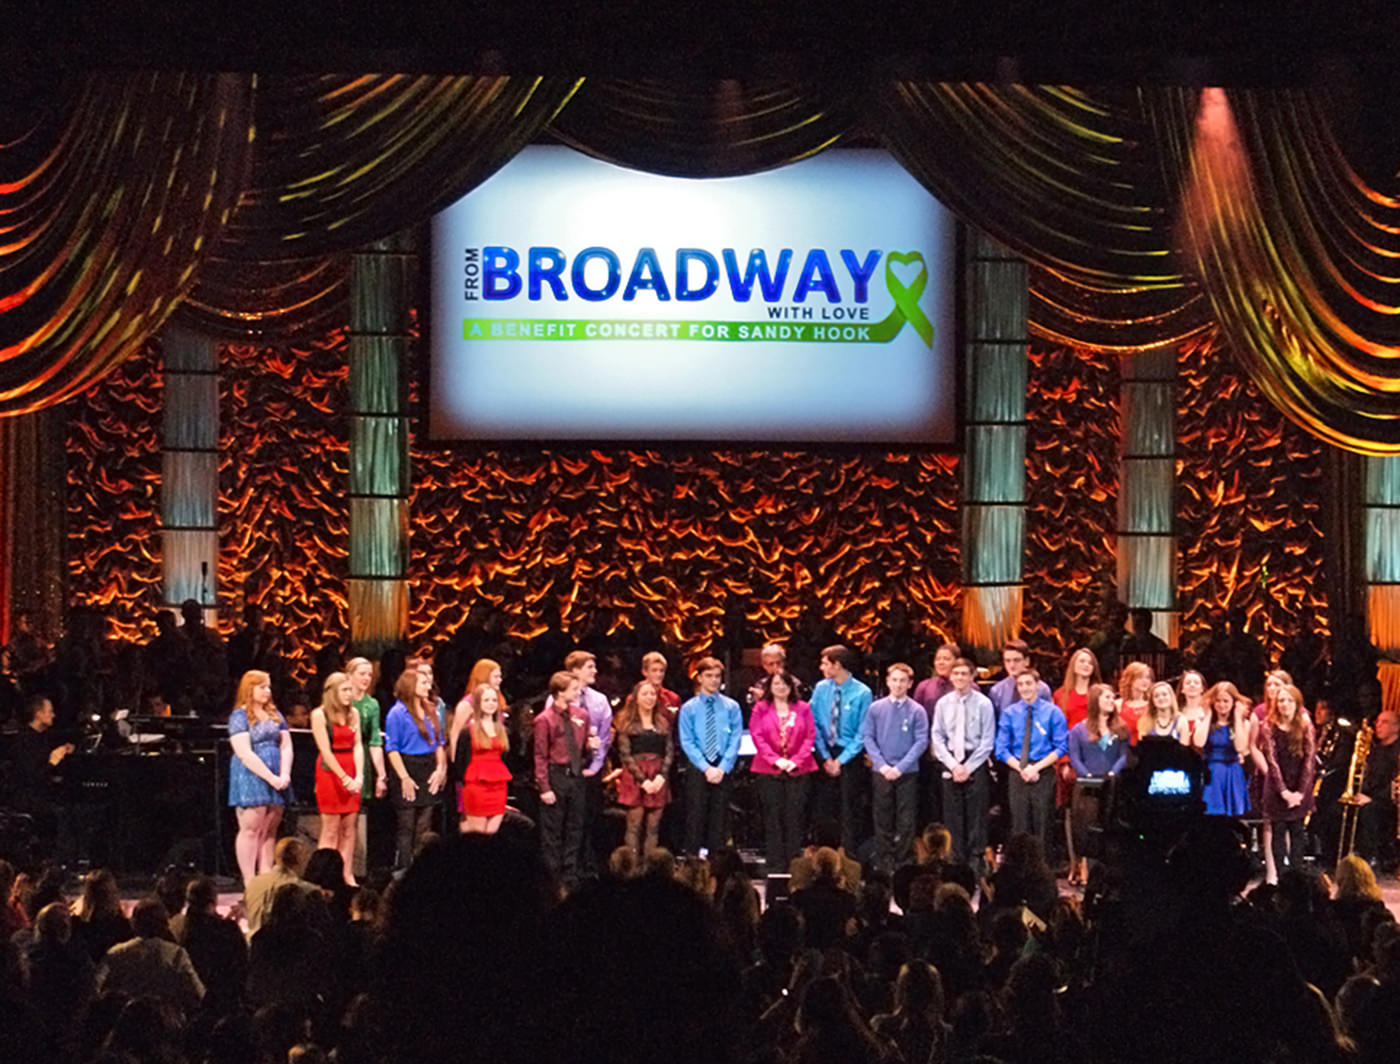 FROM BROADWAY WITH LOVE: A BENEFIT CONCERT FOR SANDY HOOK